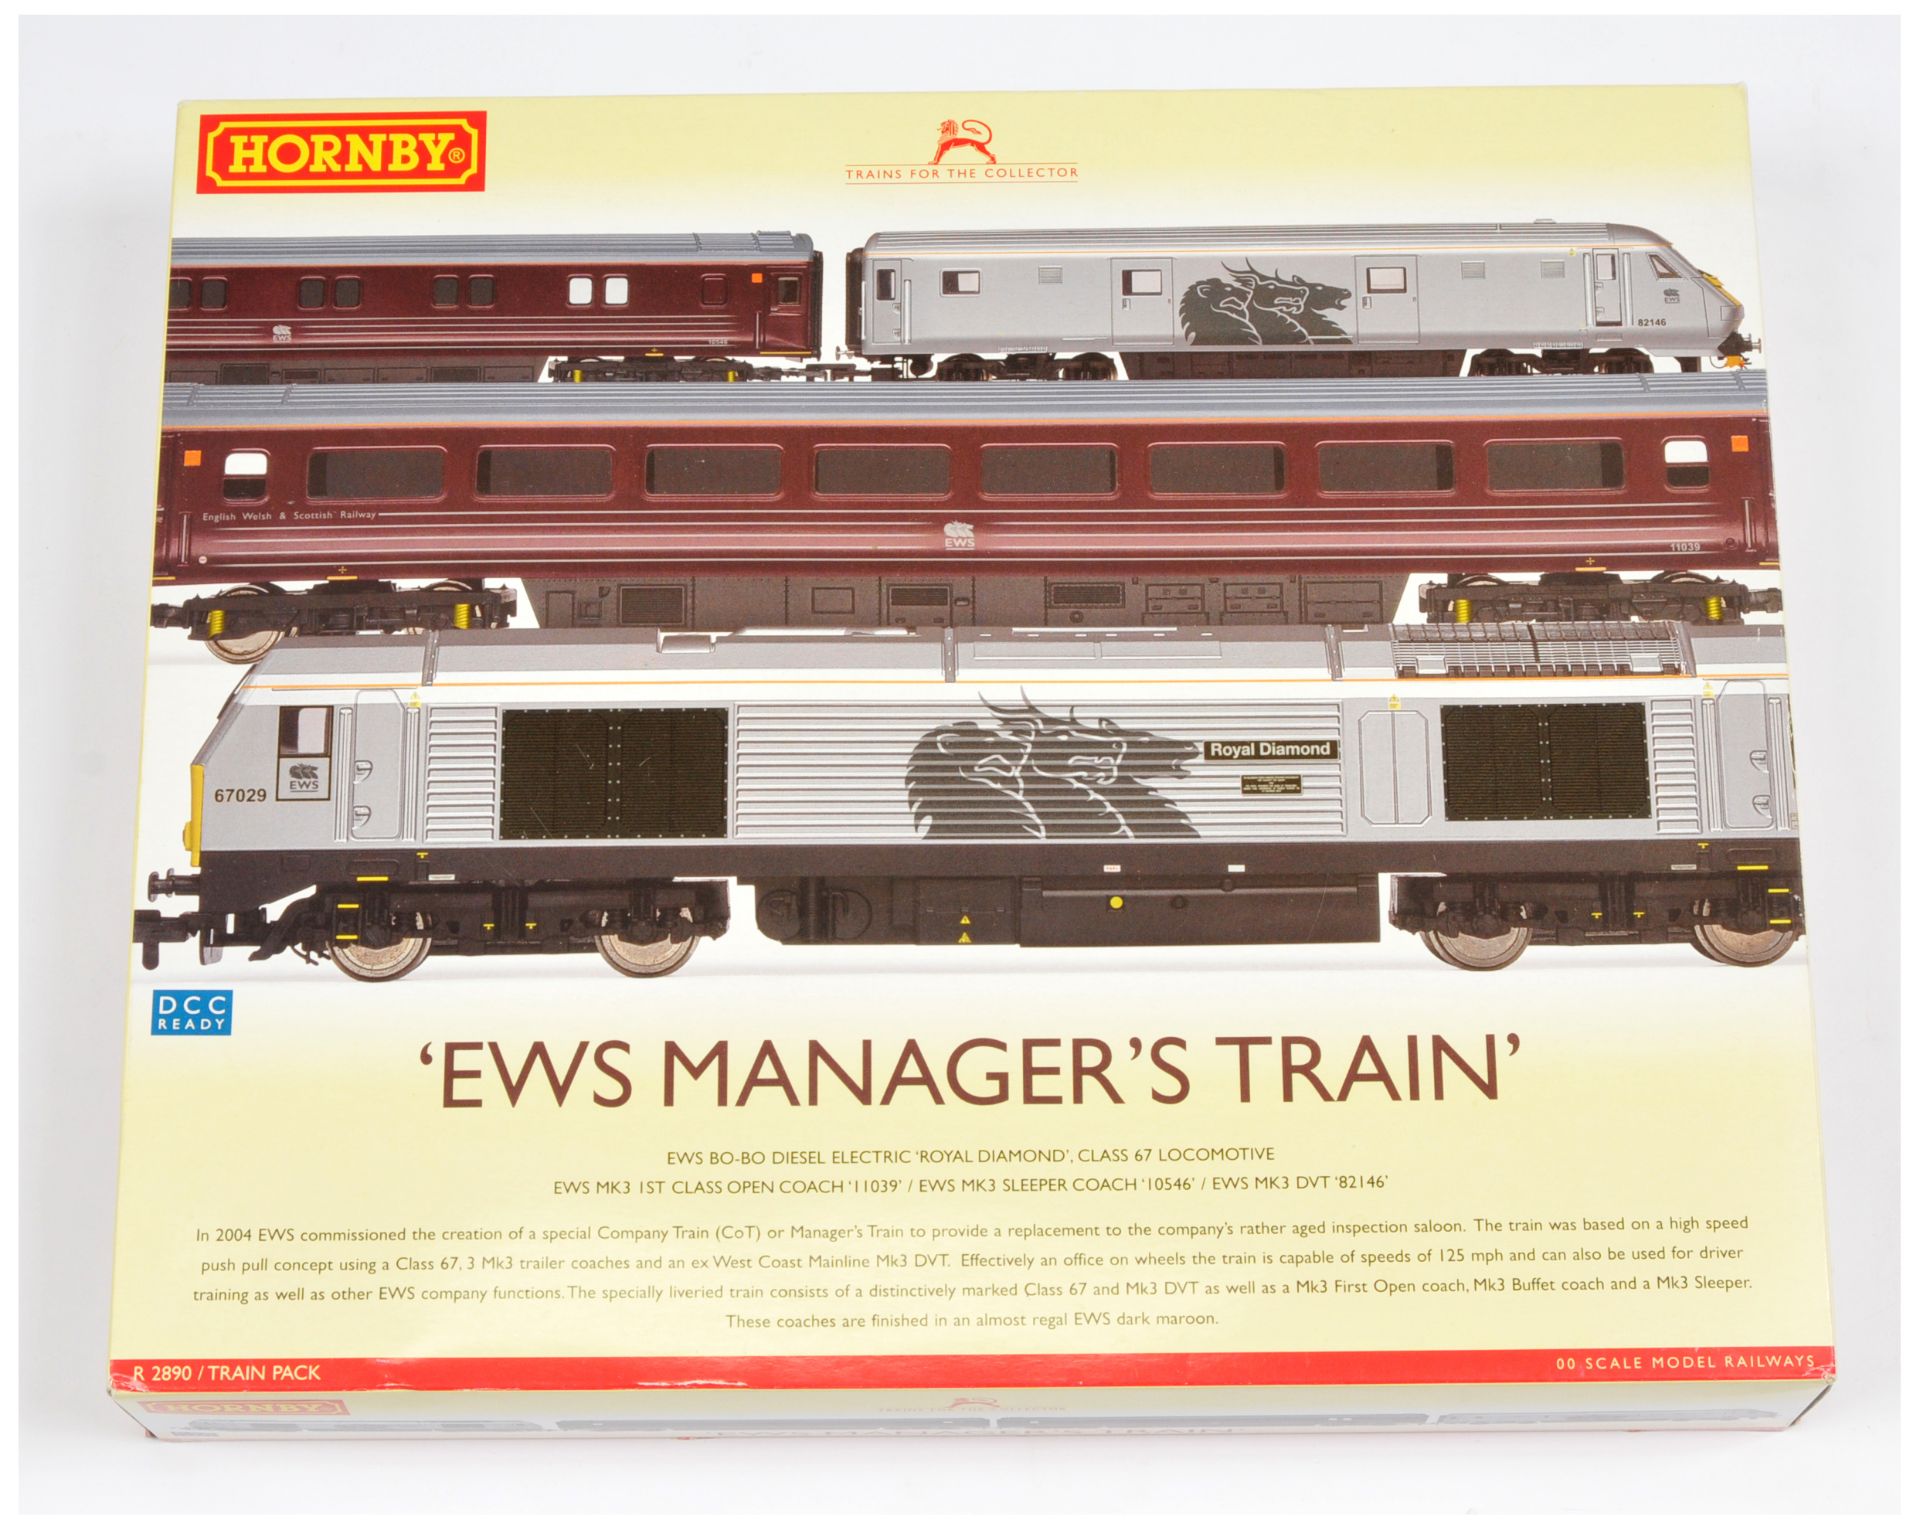 Hornby (China) R2890 "EWS Manager's Train" Pack